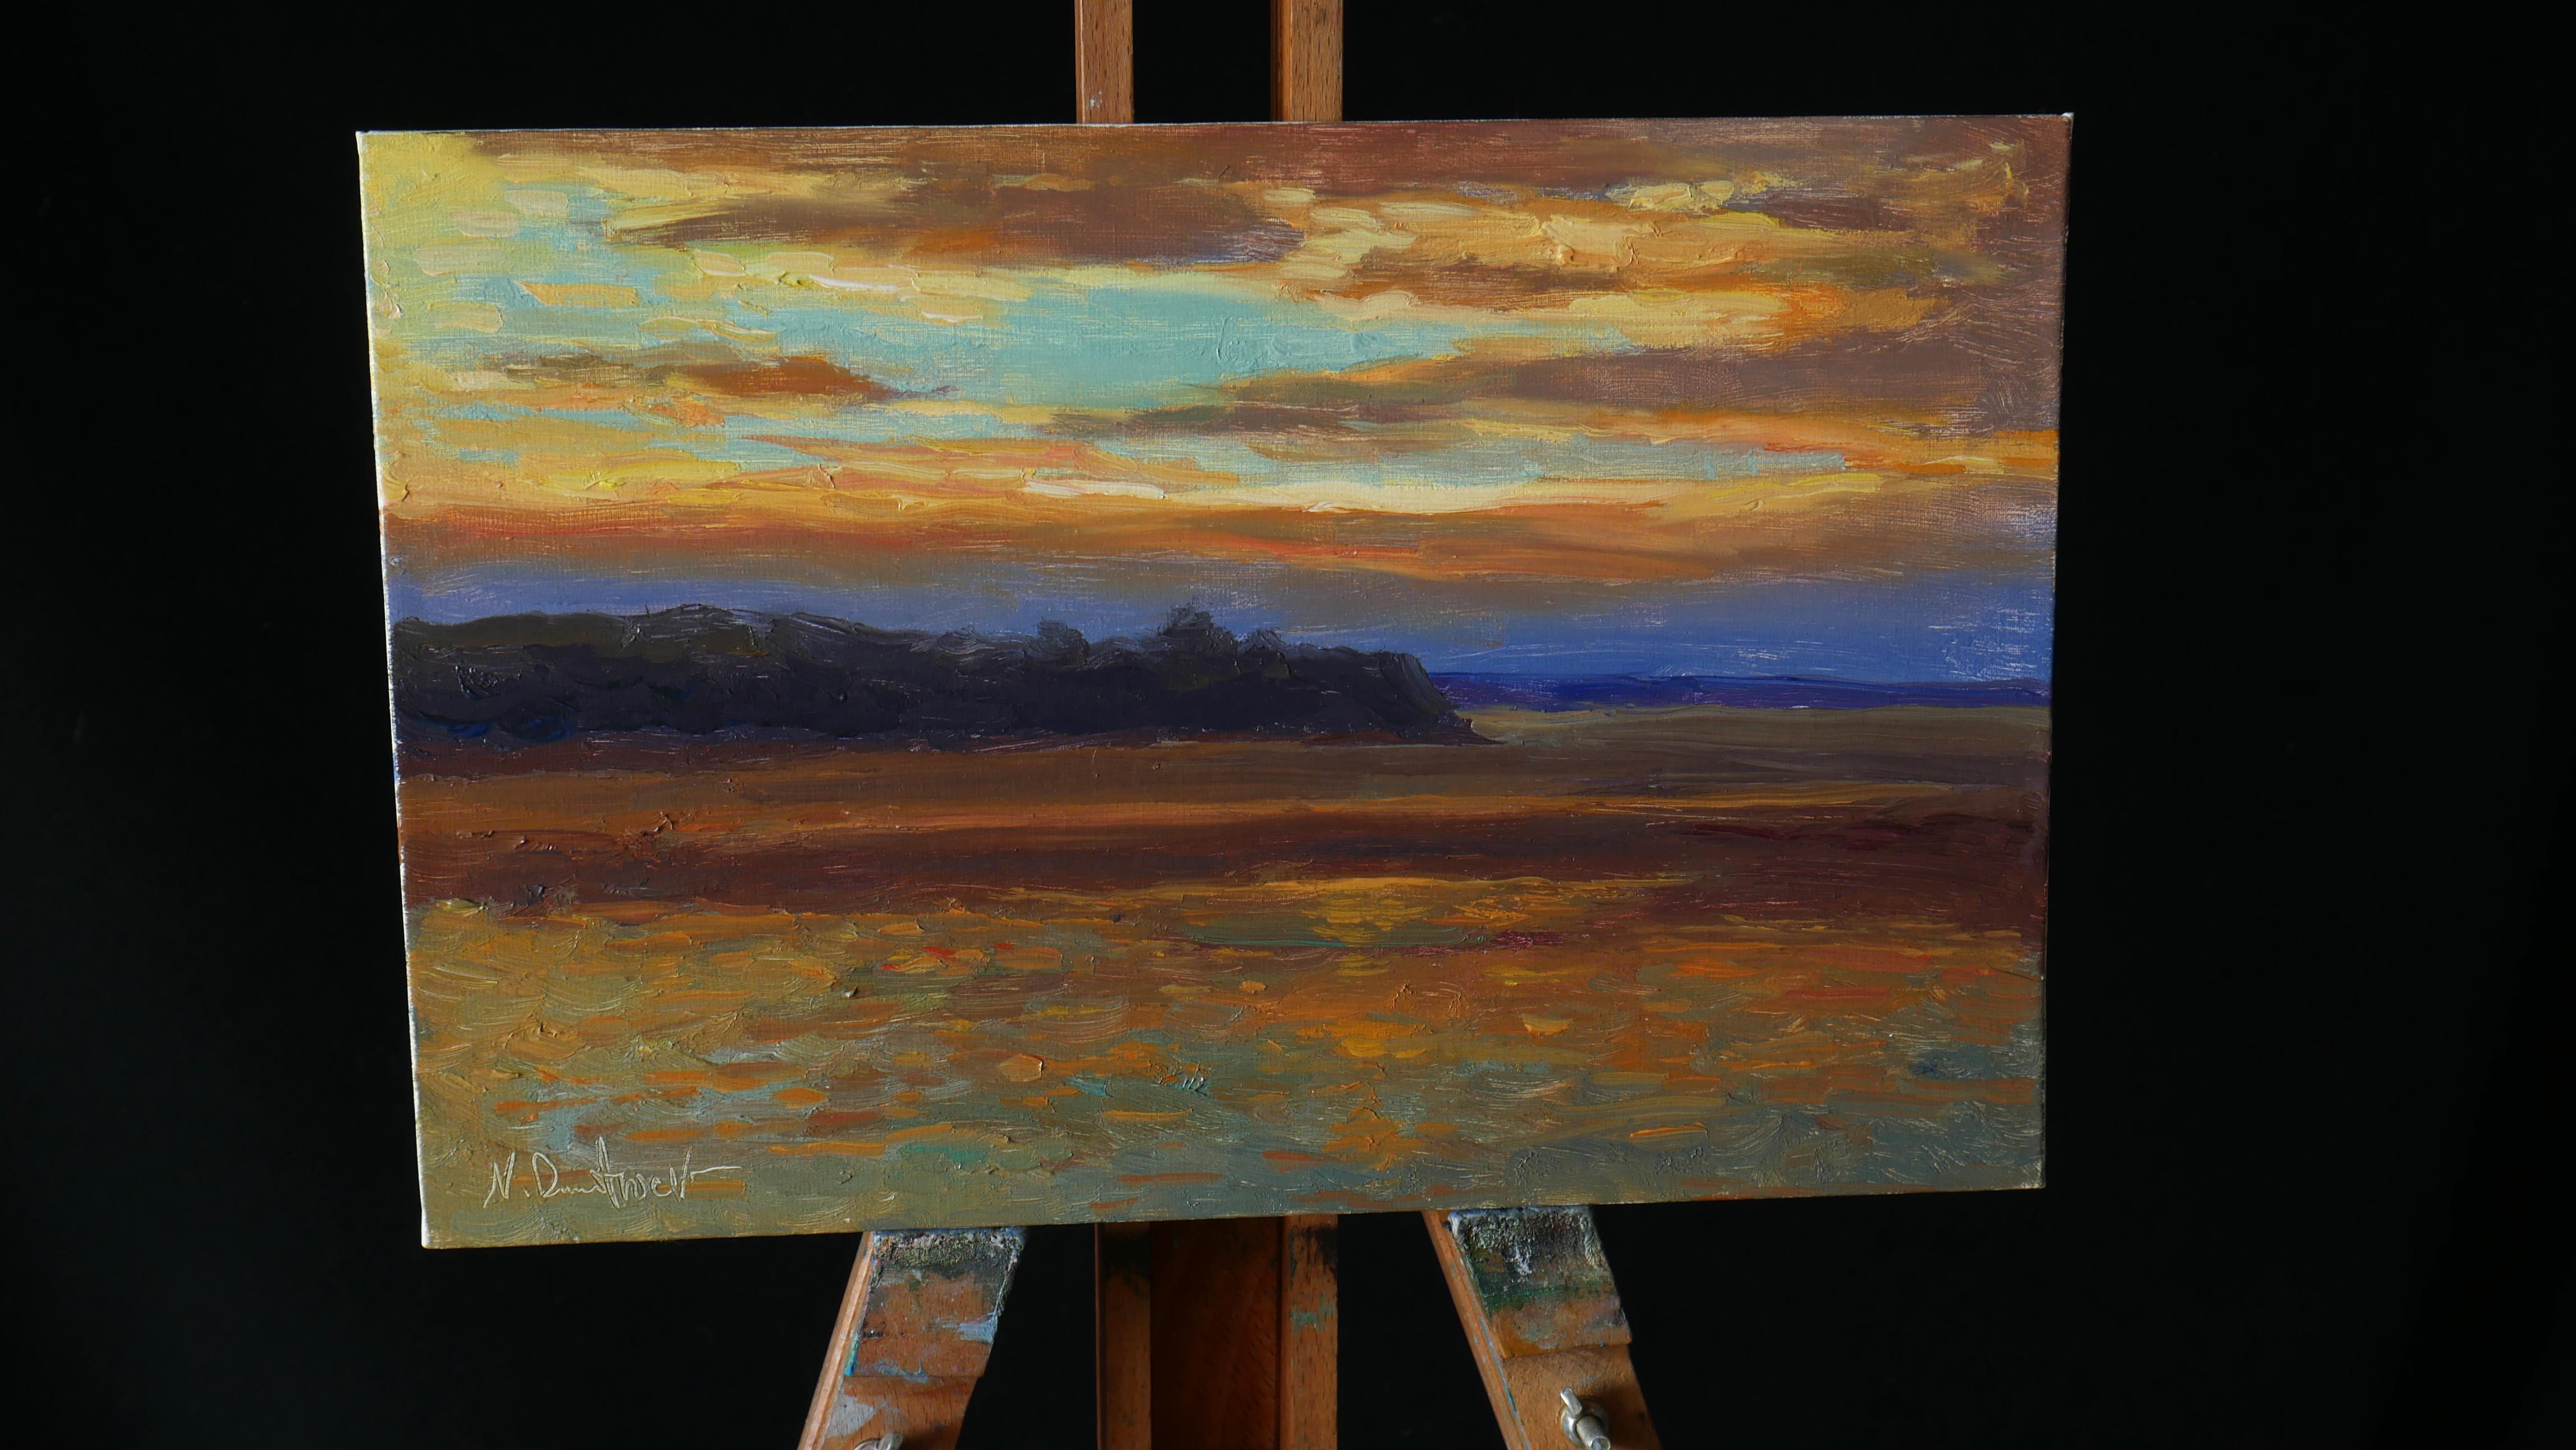 The Golden Sunset - original sunny landscape, painting - Painting by Nikolay Dmitriev